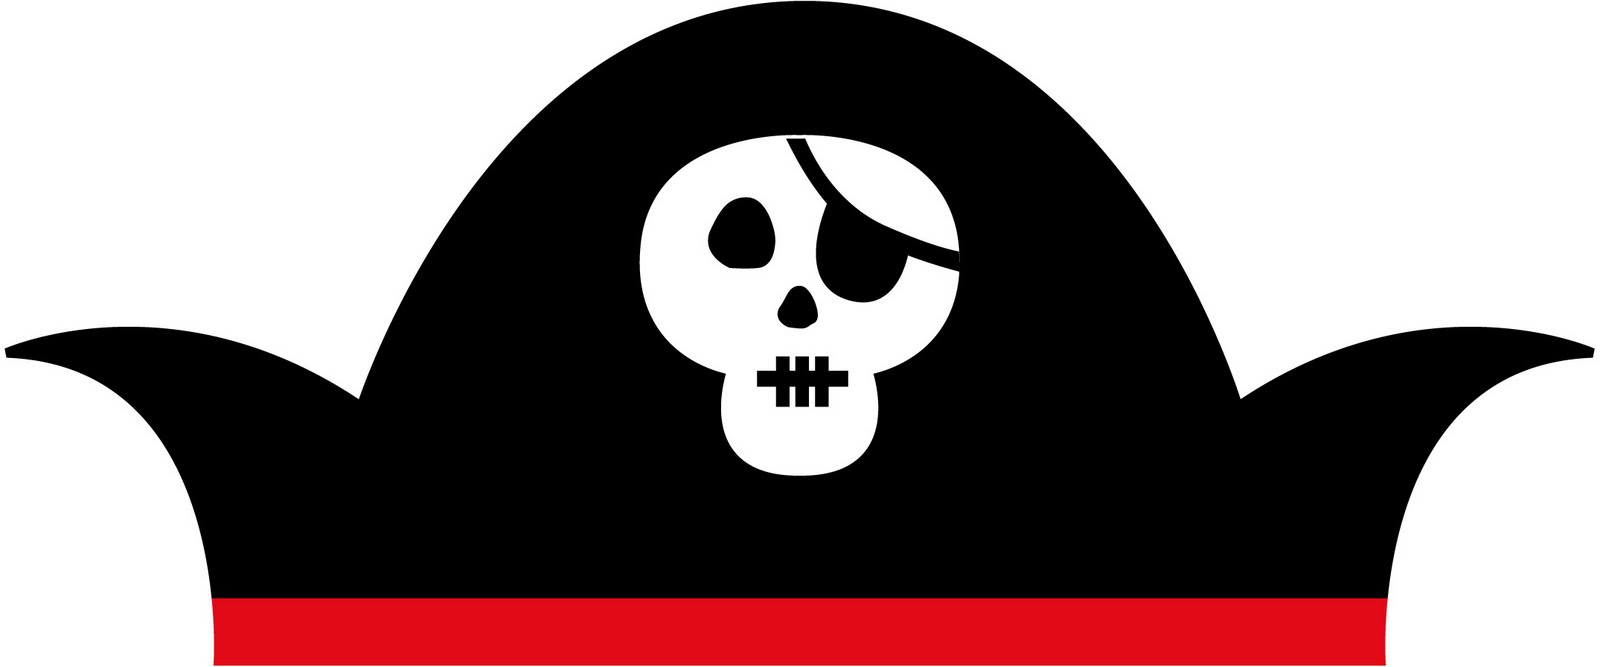 Free Pirate Hat Cliparts, Download Free Clip Art, Free Clip